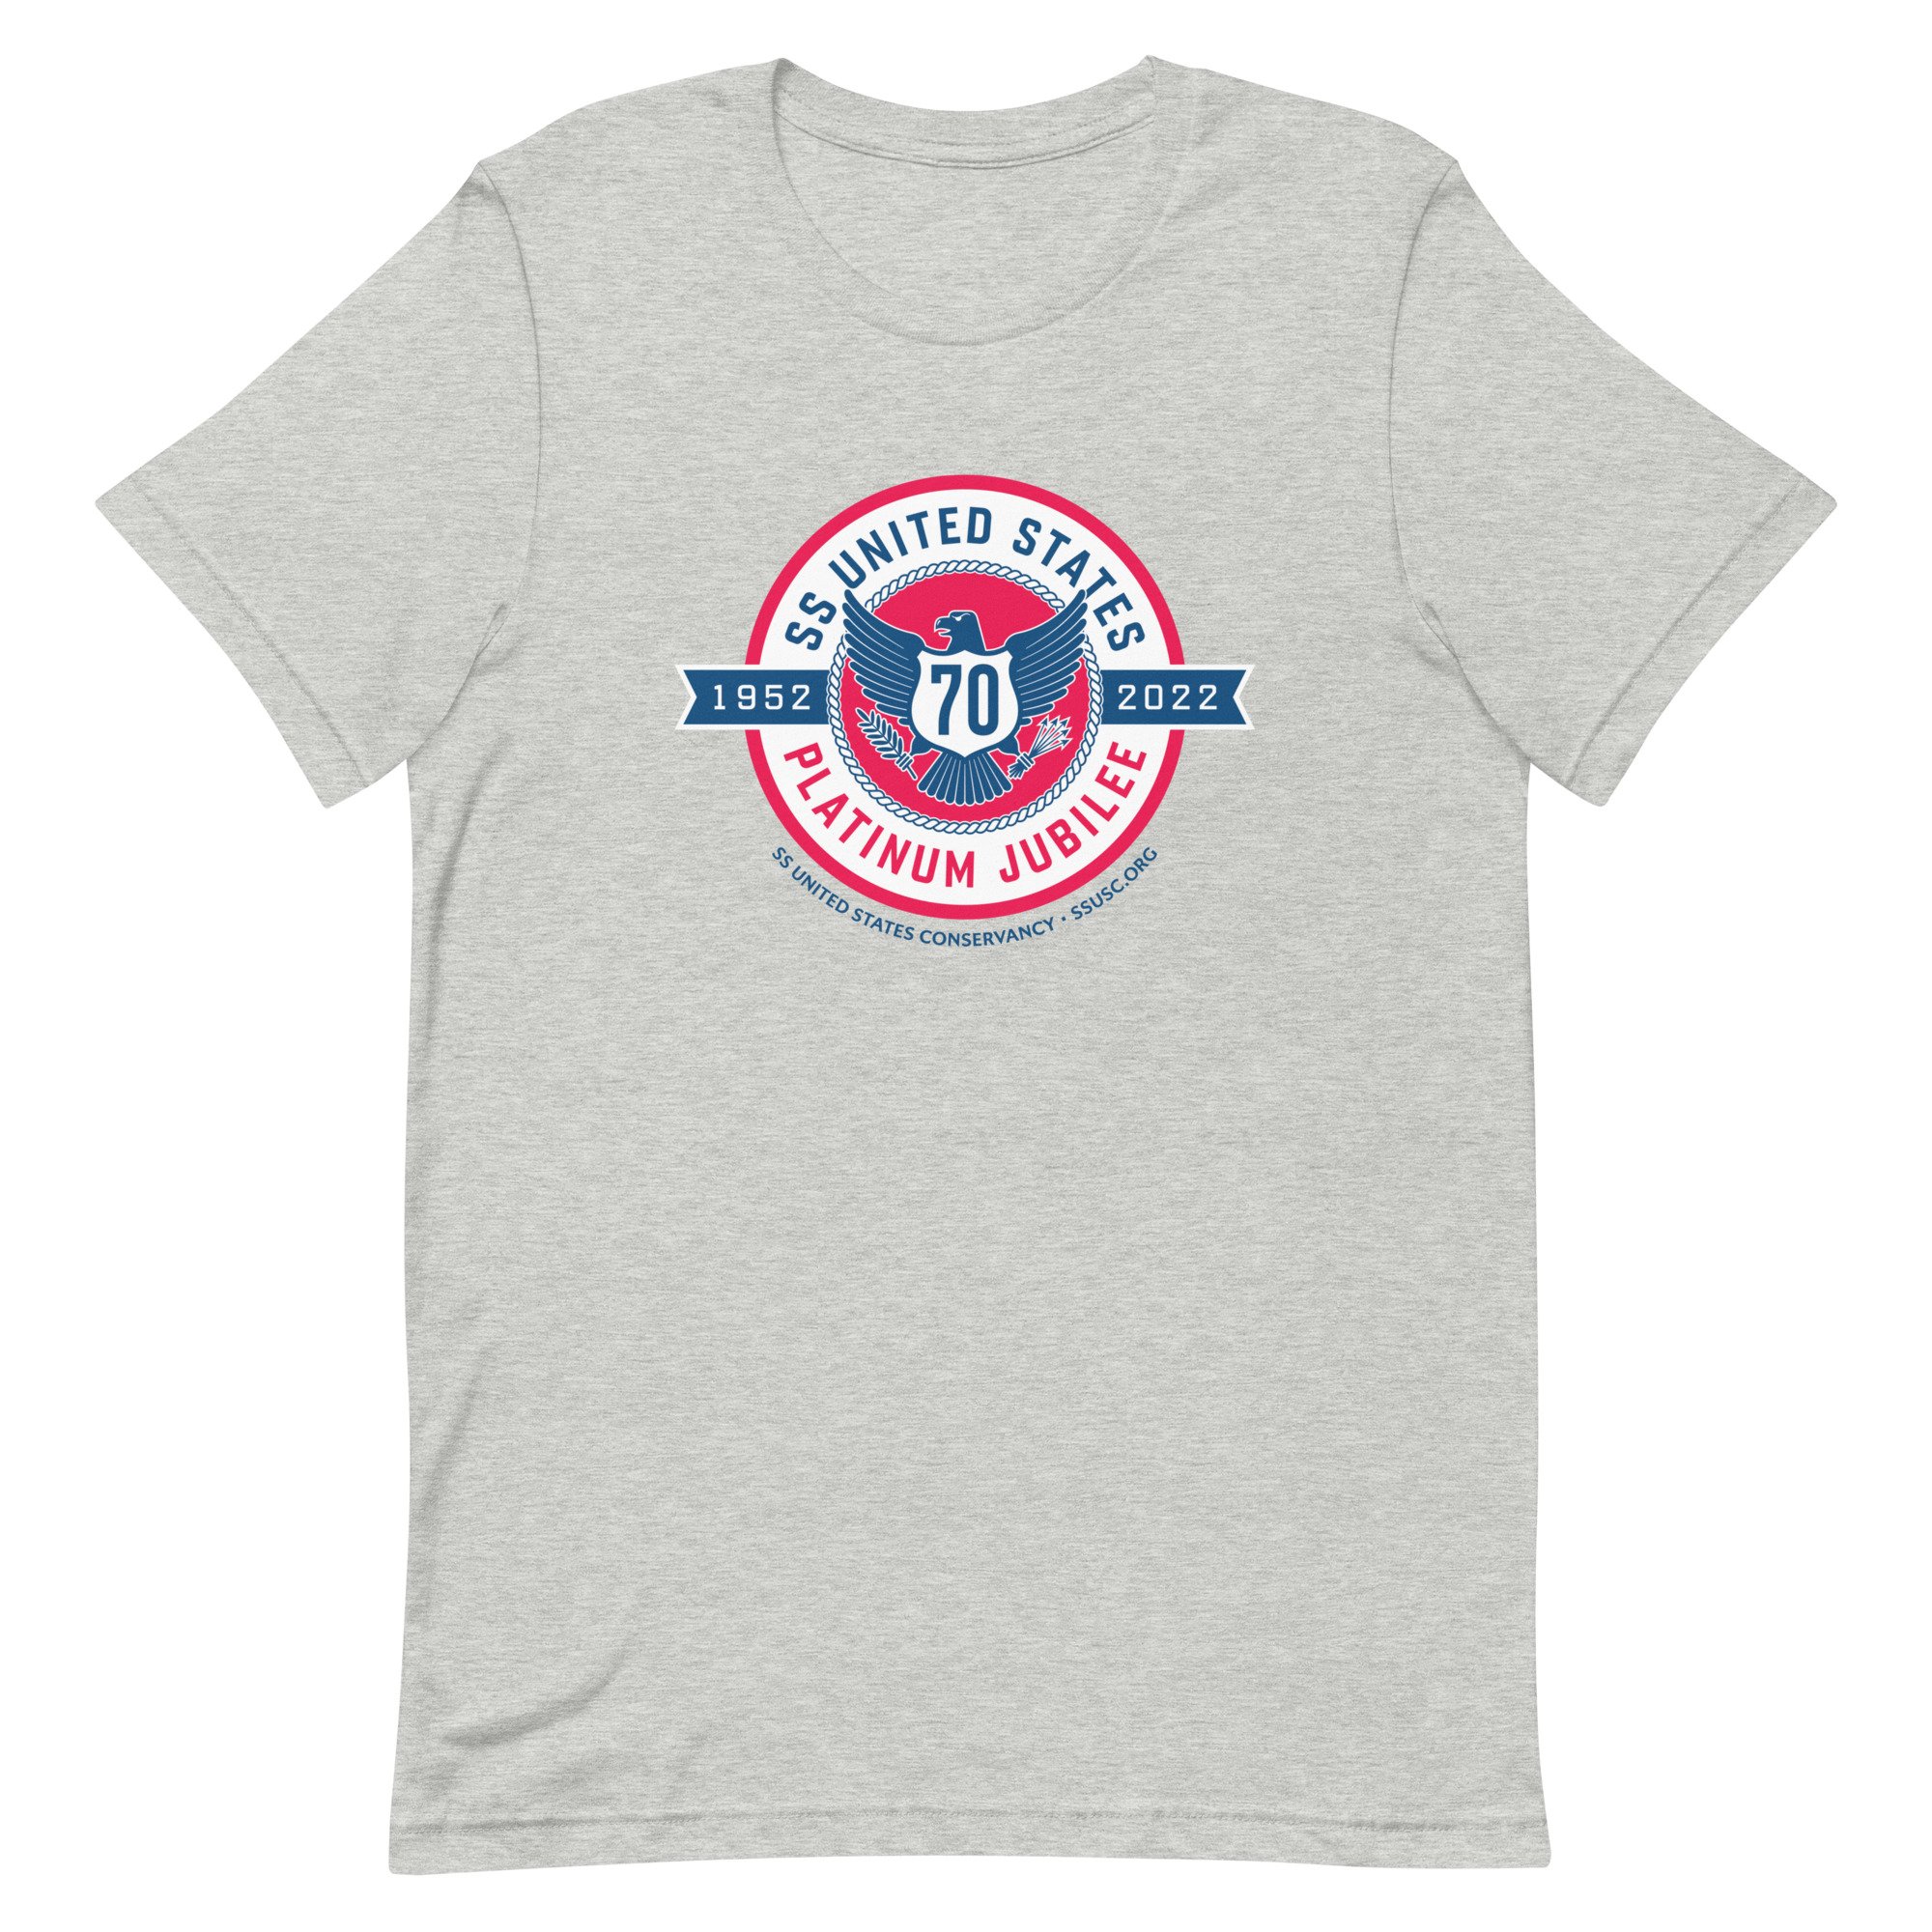 Platinum Jubilee 70th Anniversary T-shirt — SS United States Conservancy